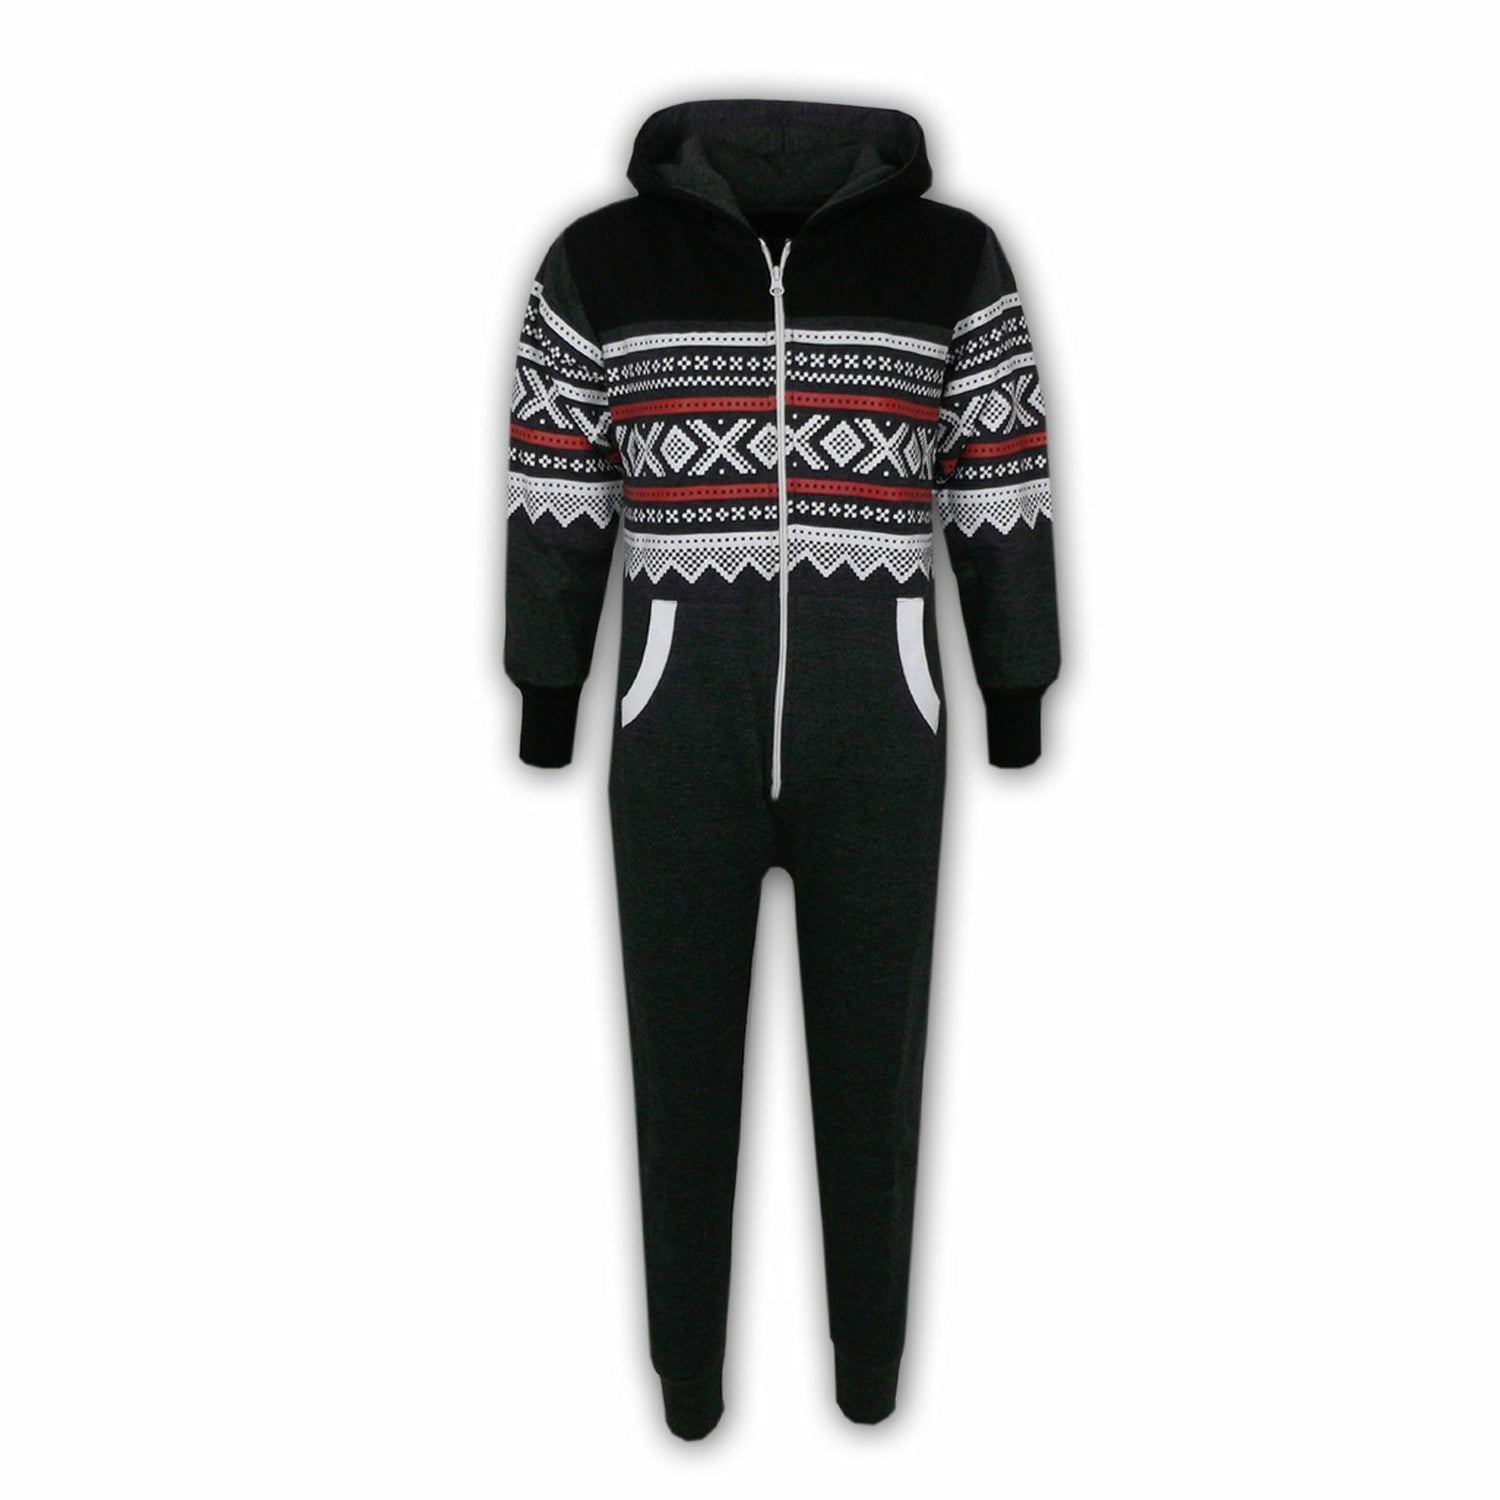 Adult Charcoal With Black Aztec Design Onesie. Cotton Lined Hood With Fleece Lining In The Rest Of The Onesie. The Cuffs and Ankles Are Ribbed Elastic. These Are To Be Worn Loosely. Sizes Small To X- Large.